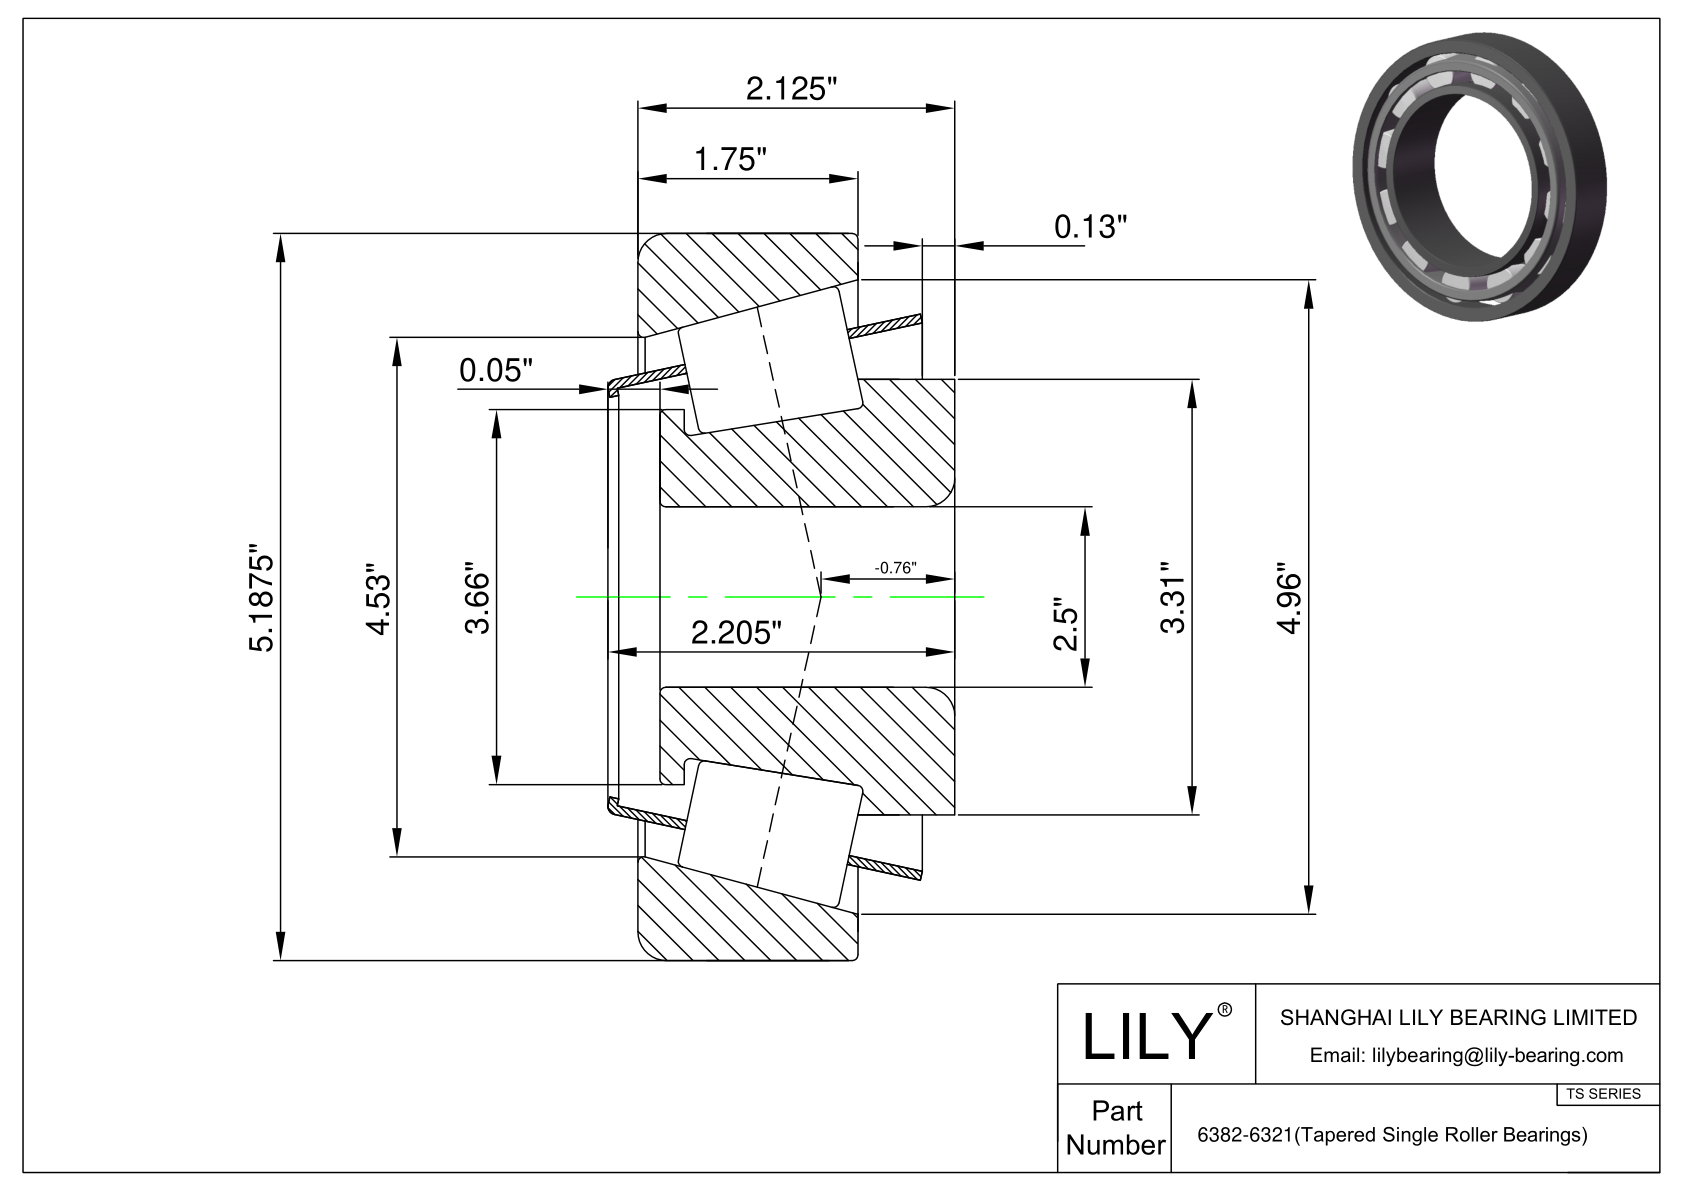 6382-6321 TS (Tapered Single Roller Bearings) (Imperial) cad drawing